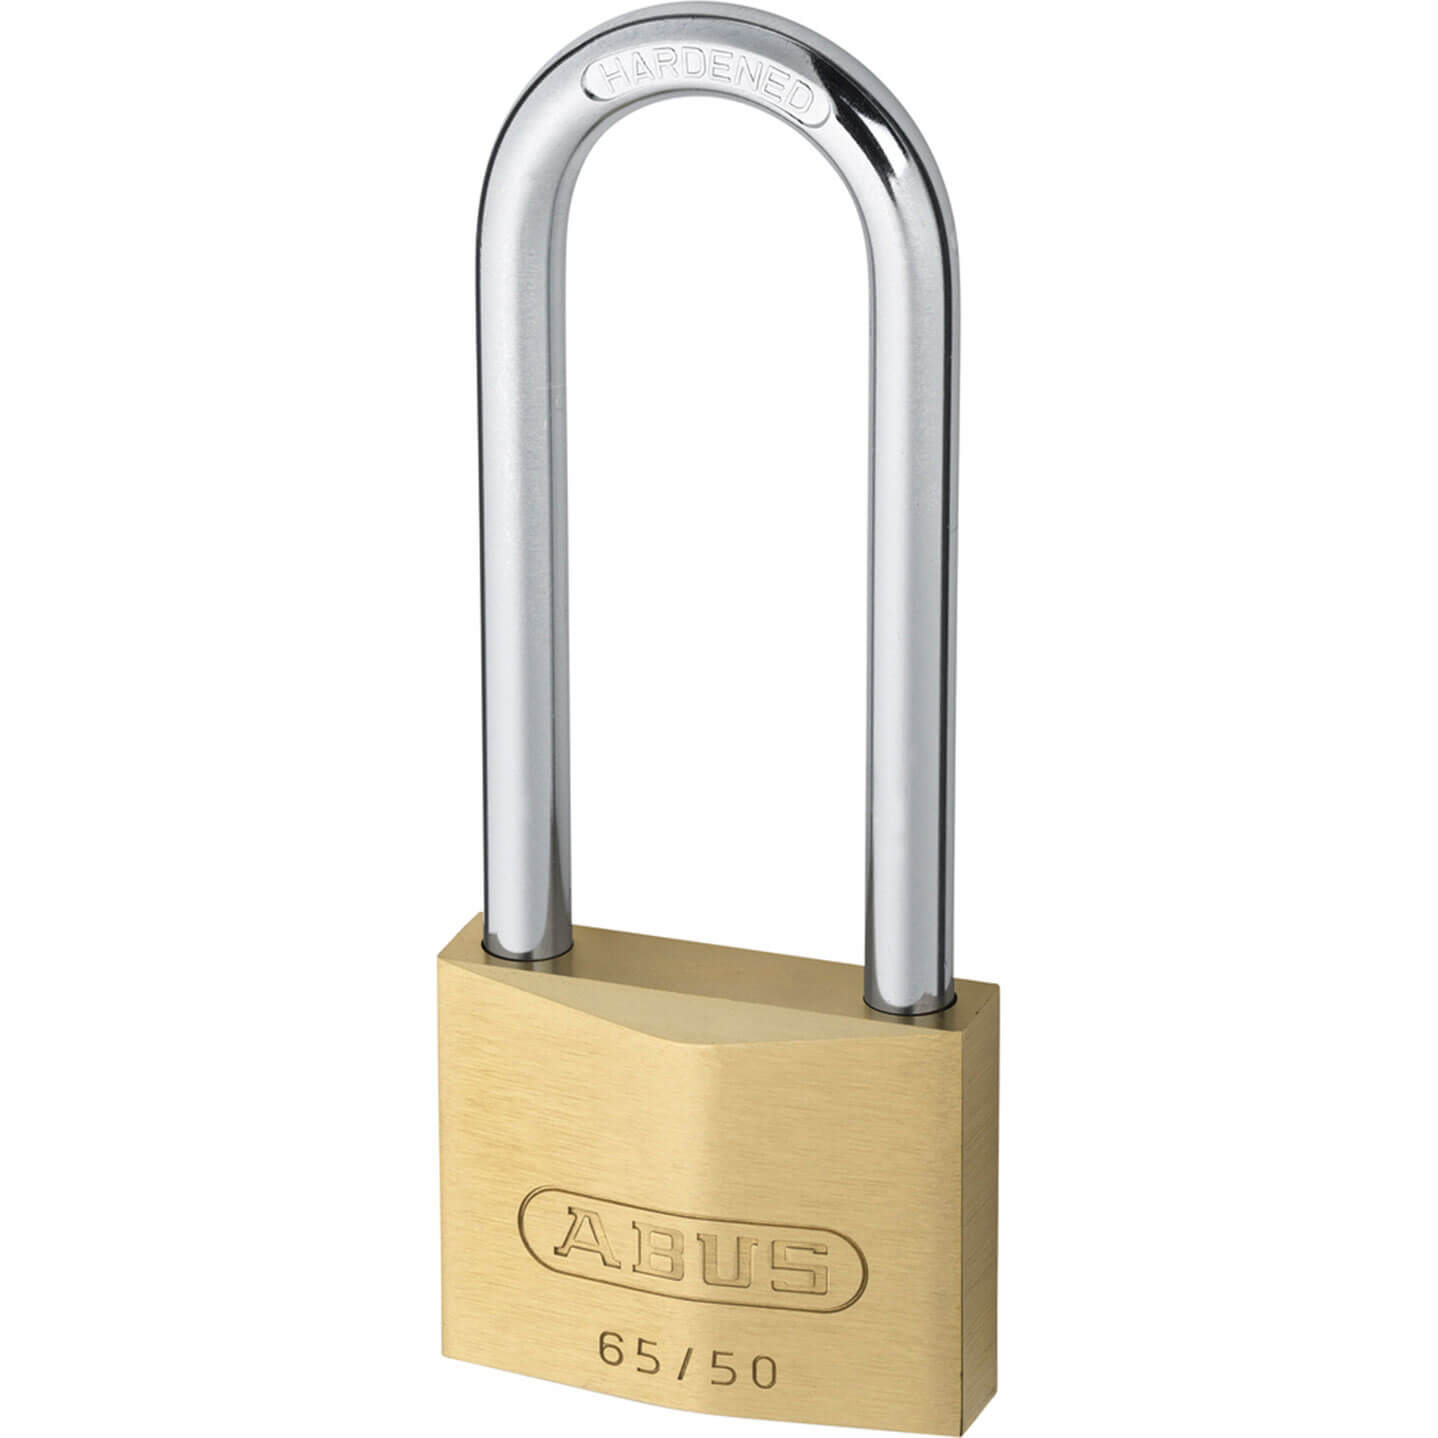 Photo of Abus 65 Series Compact Brass Padlock 50mm Extra Long